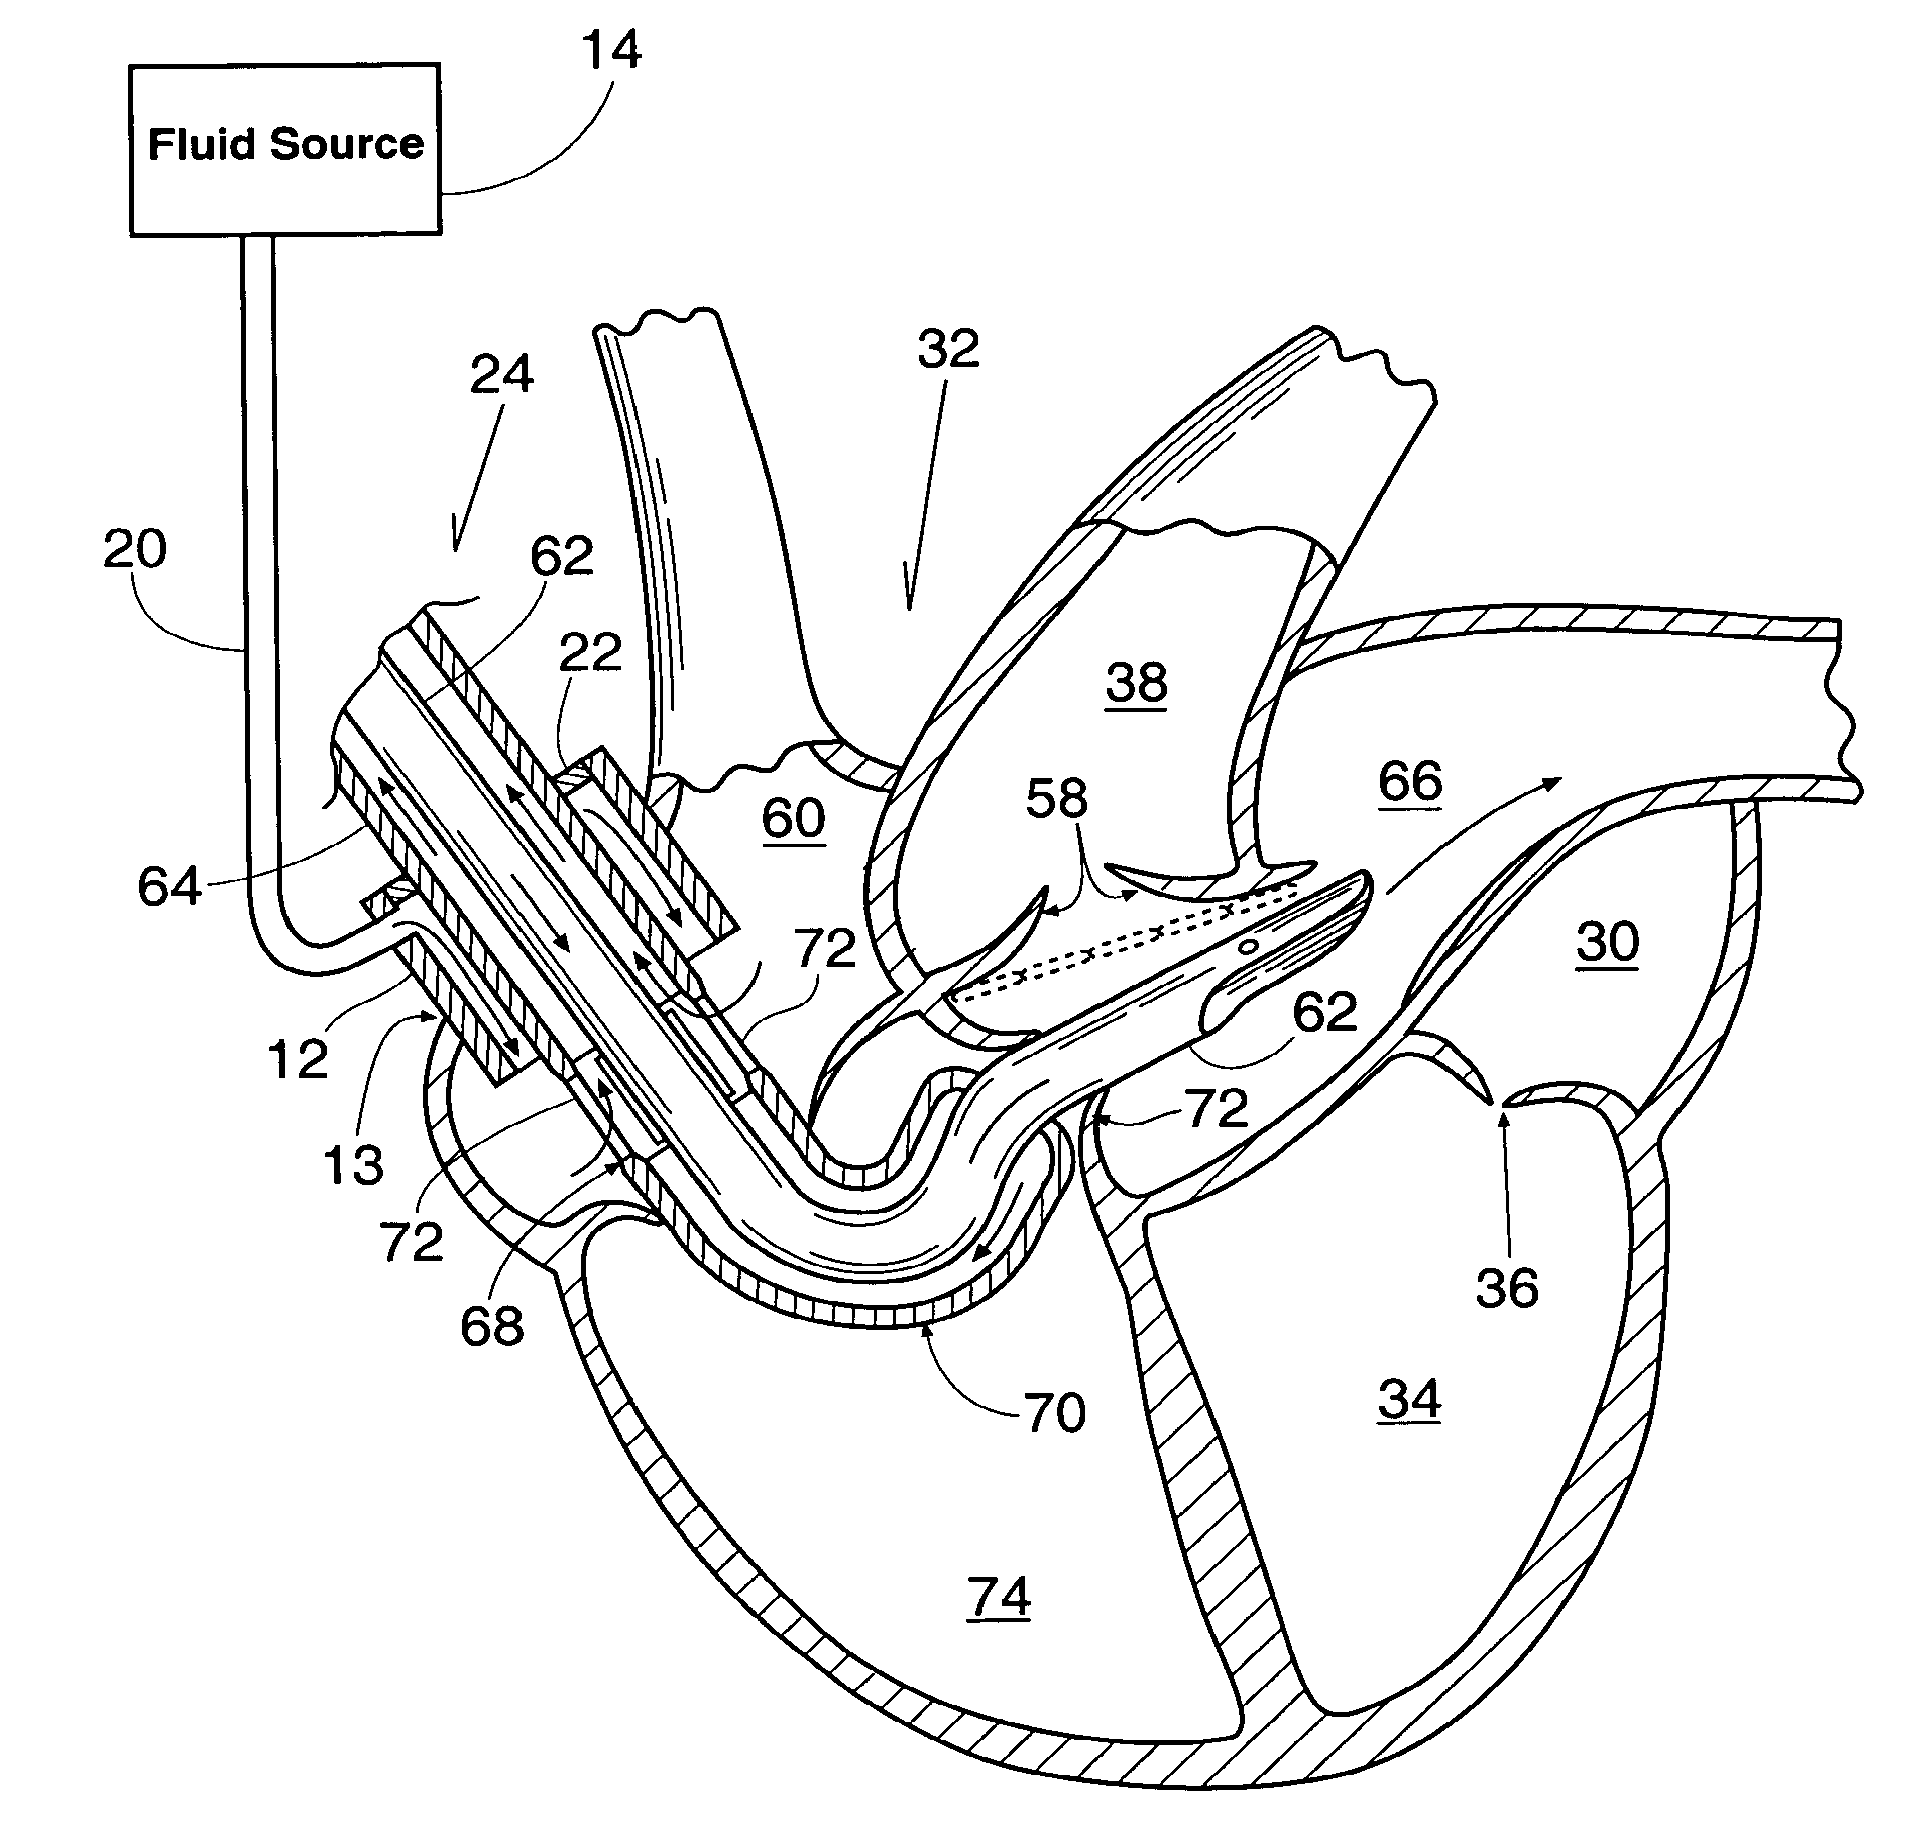 Method and Apparatus for Preventing Air Embolisms